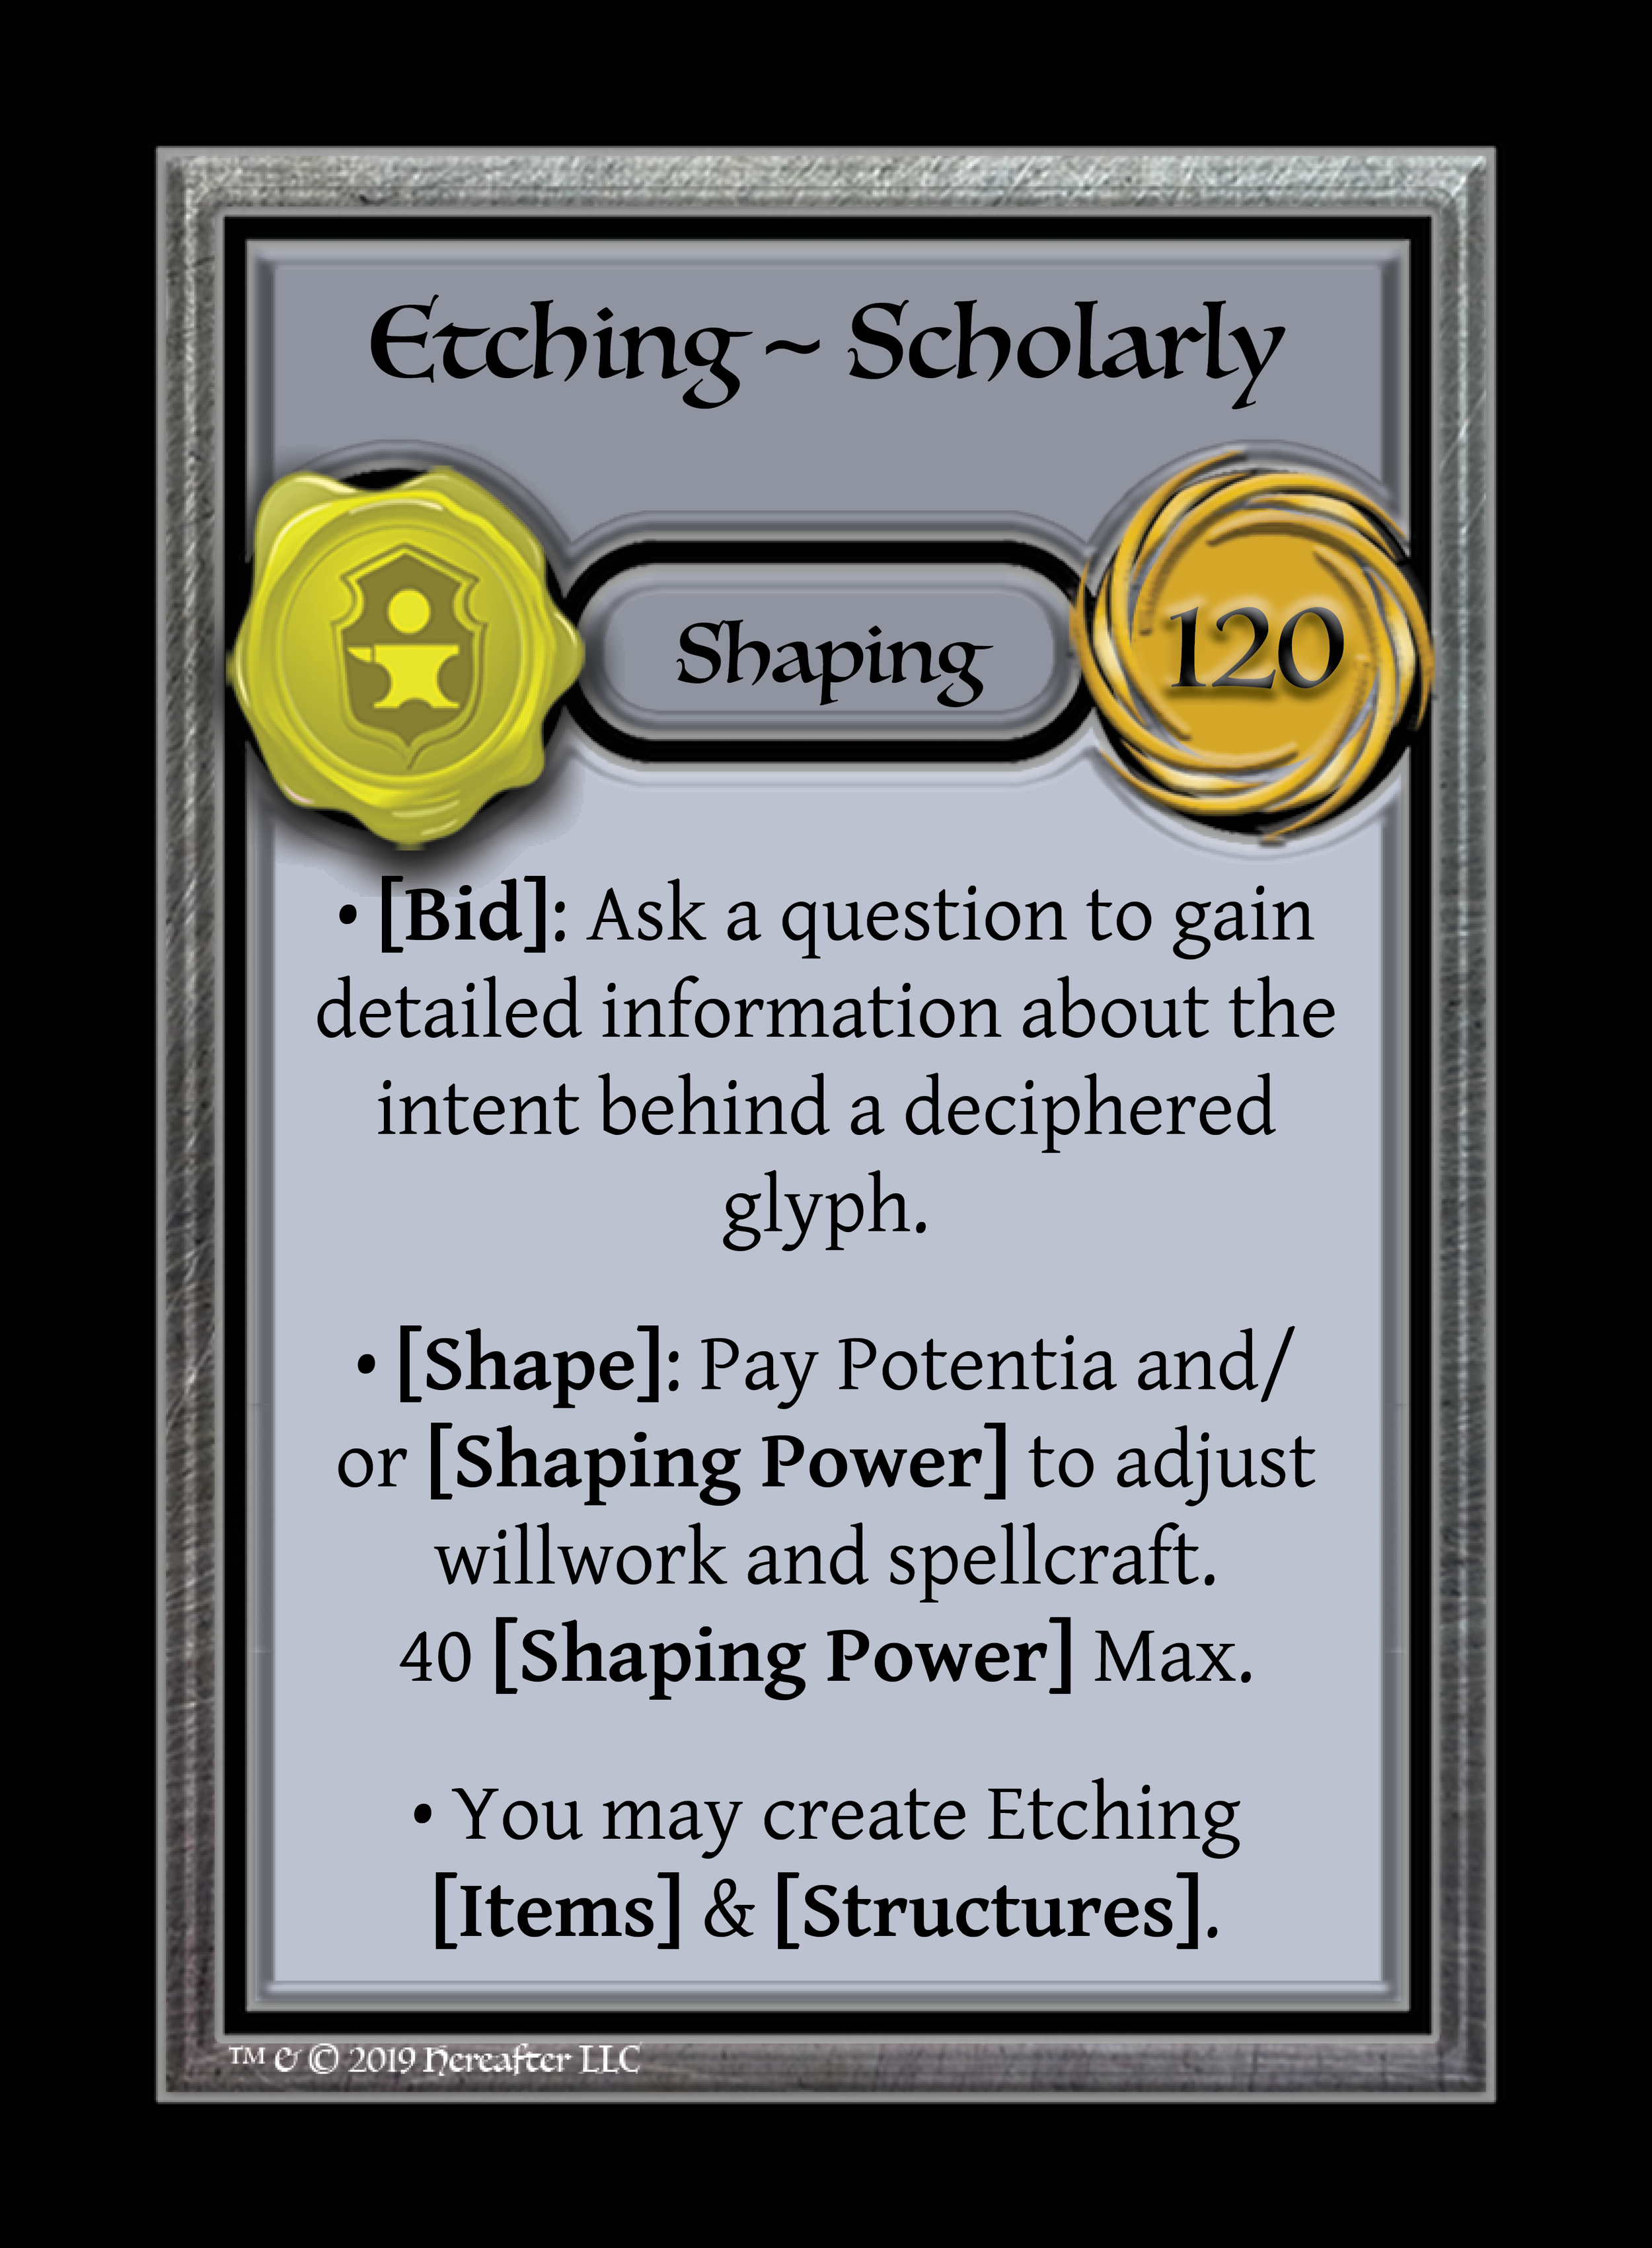 248_Shaping_Etching ~ Scholarly_().png